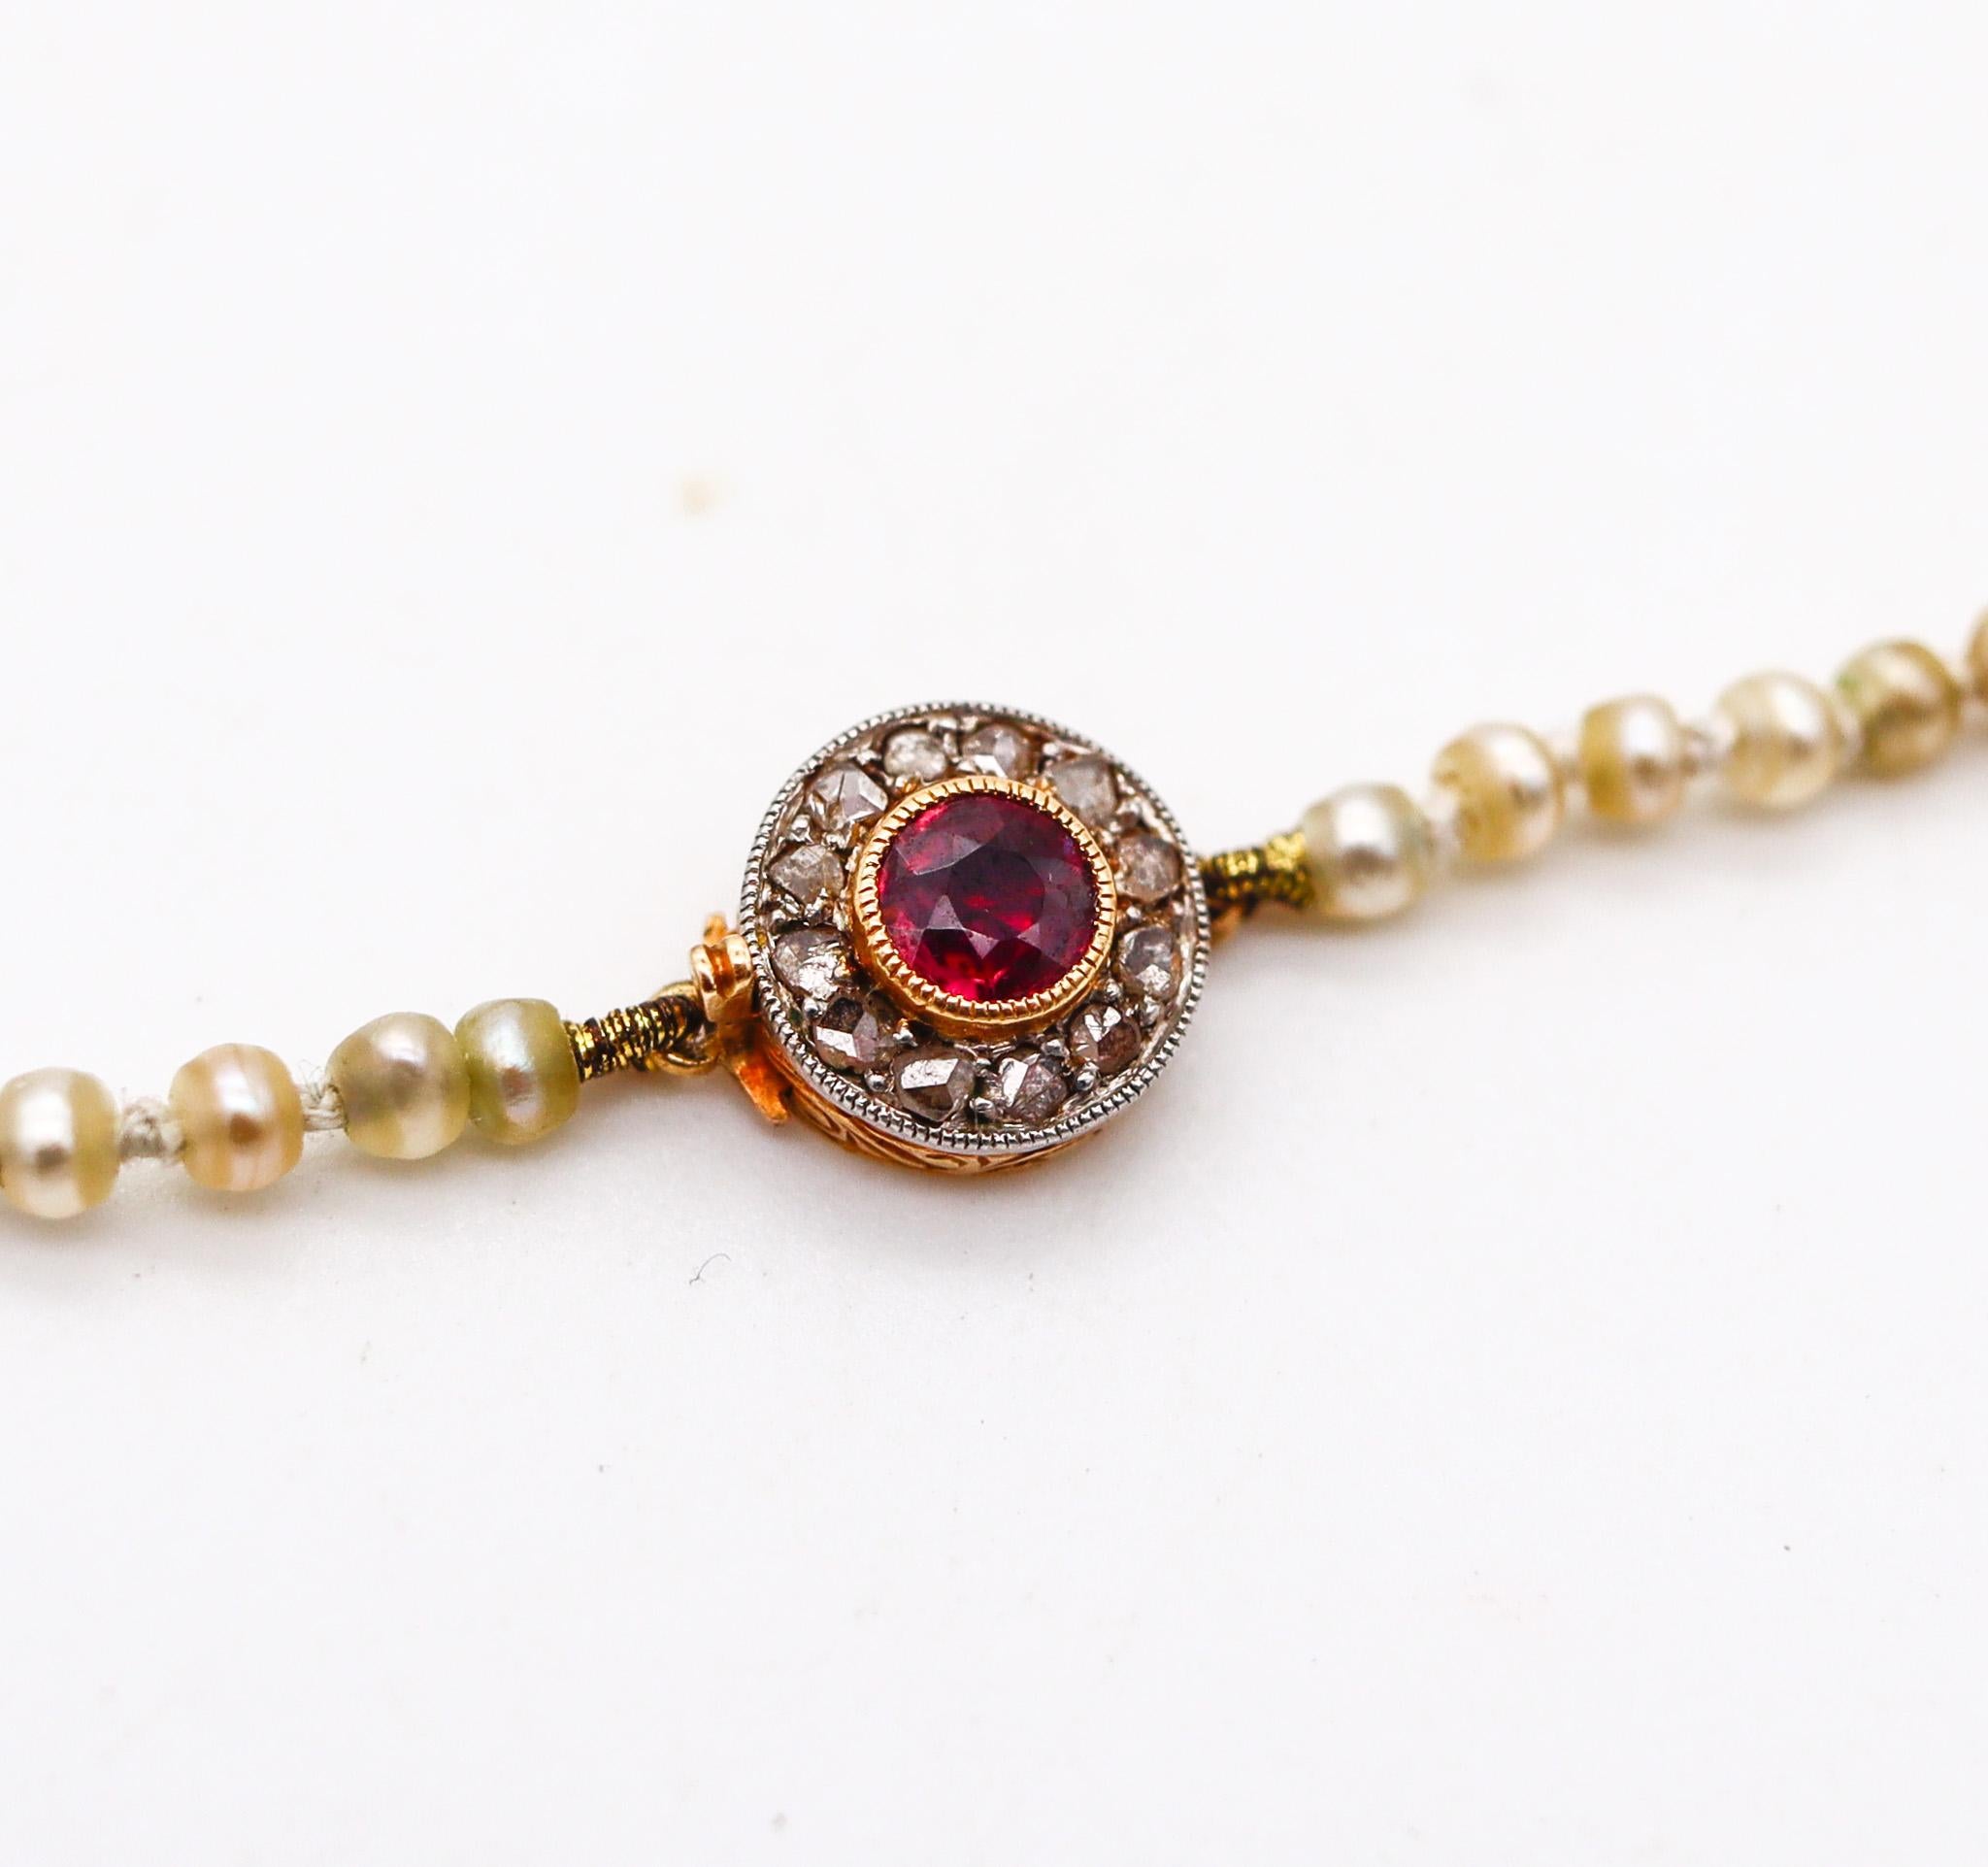 Women's French 1900 Edwardian Natural Pearls Necklace In 18Kt Gold With Diamonds & Ruby For Sale